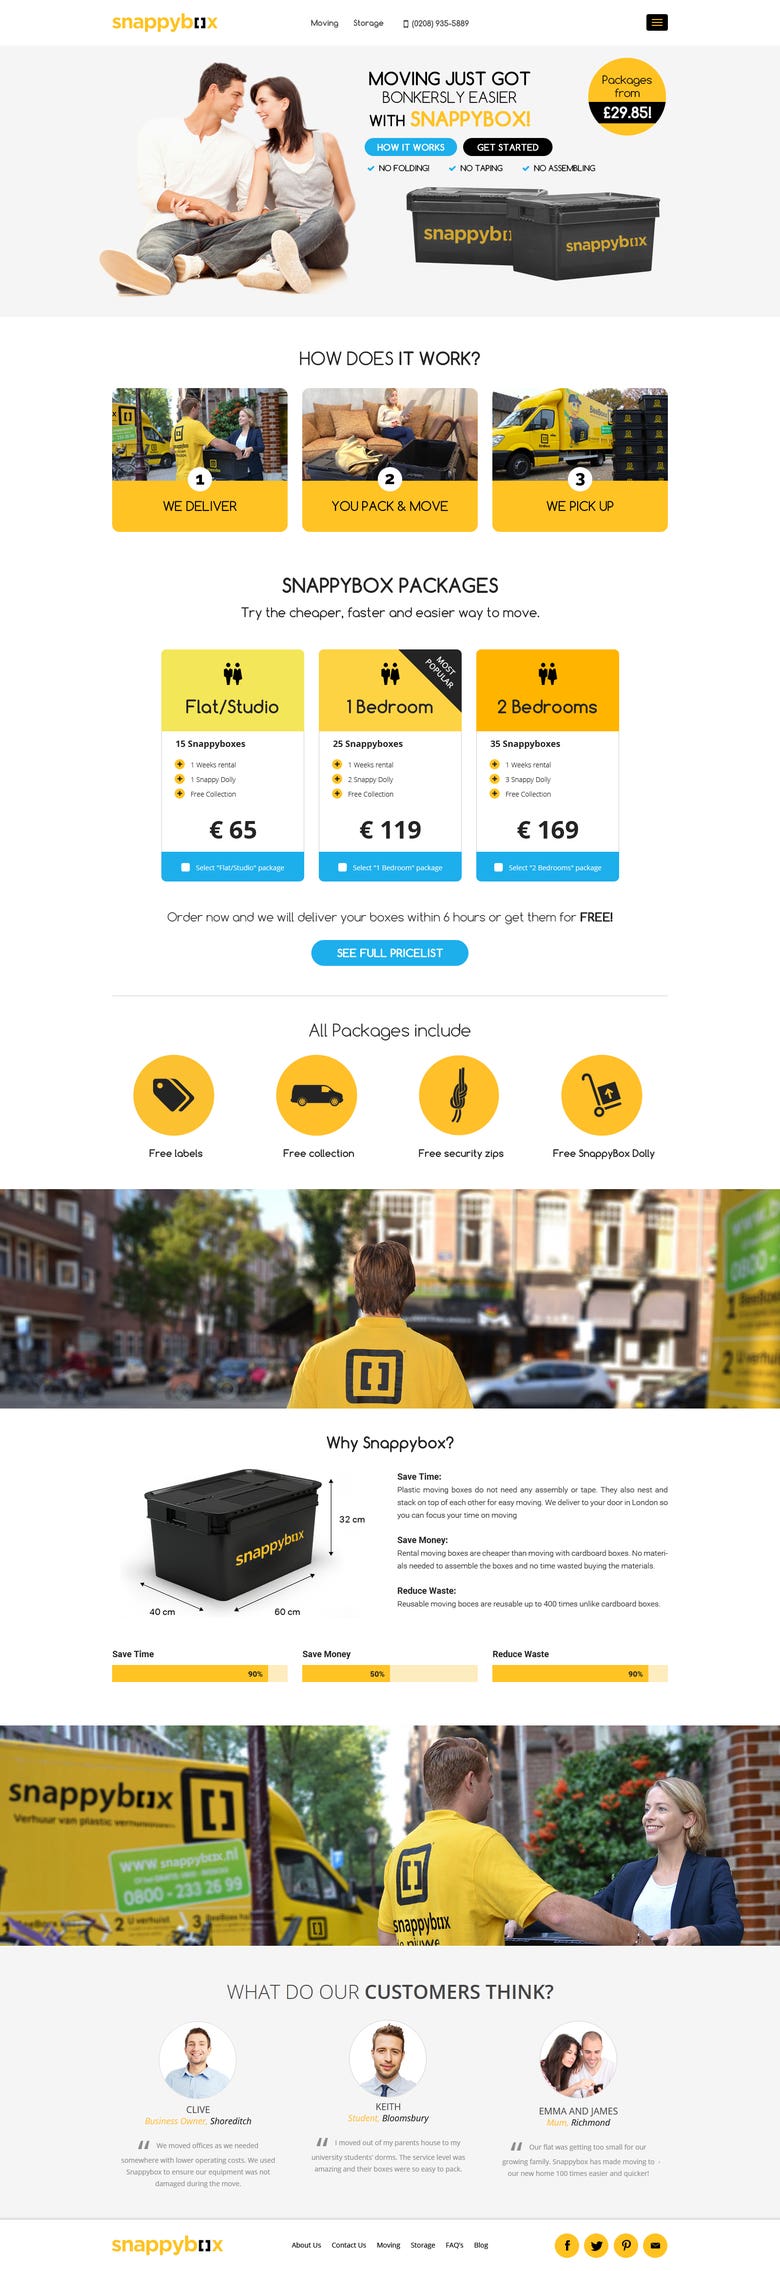 Snappybox Website Design and bootstrap html/css, Wordpress